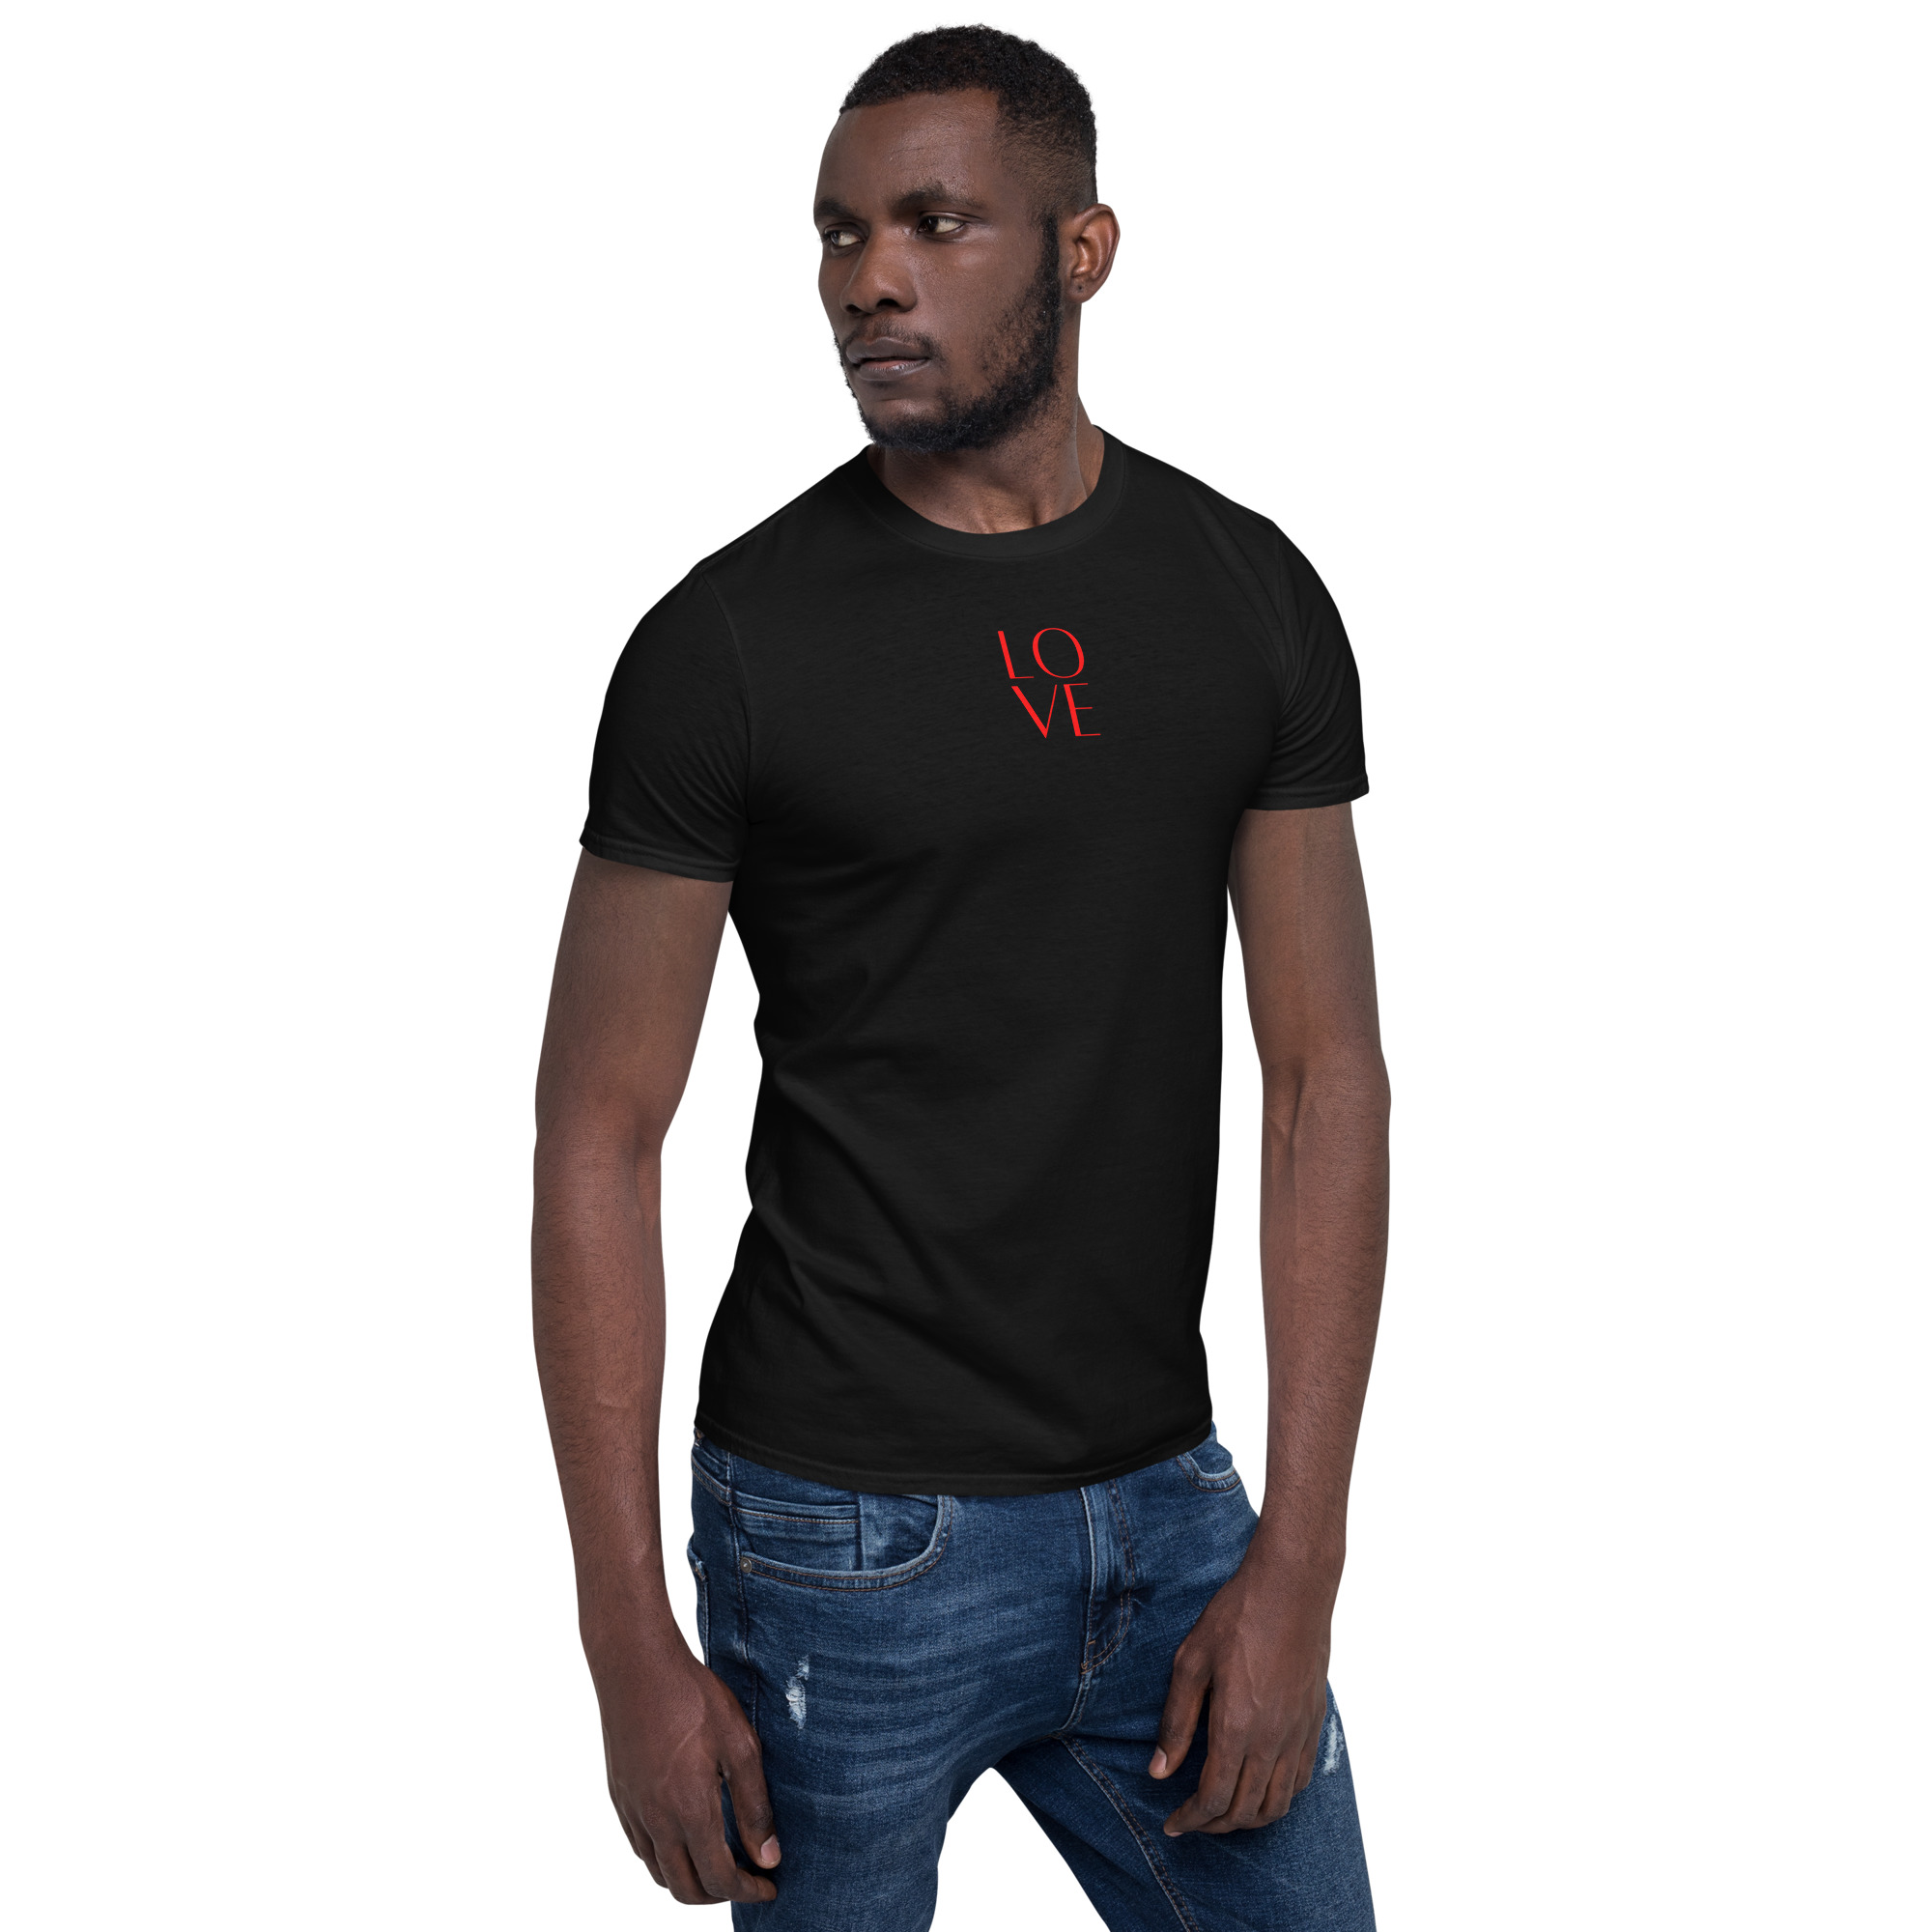 unisex-basic-softstyle-t-shirt-black-right-front-6384ccde17472.jpg